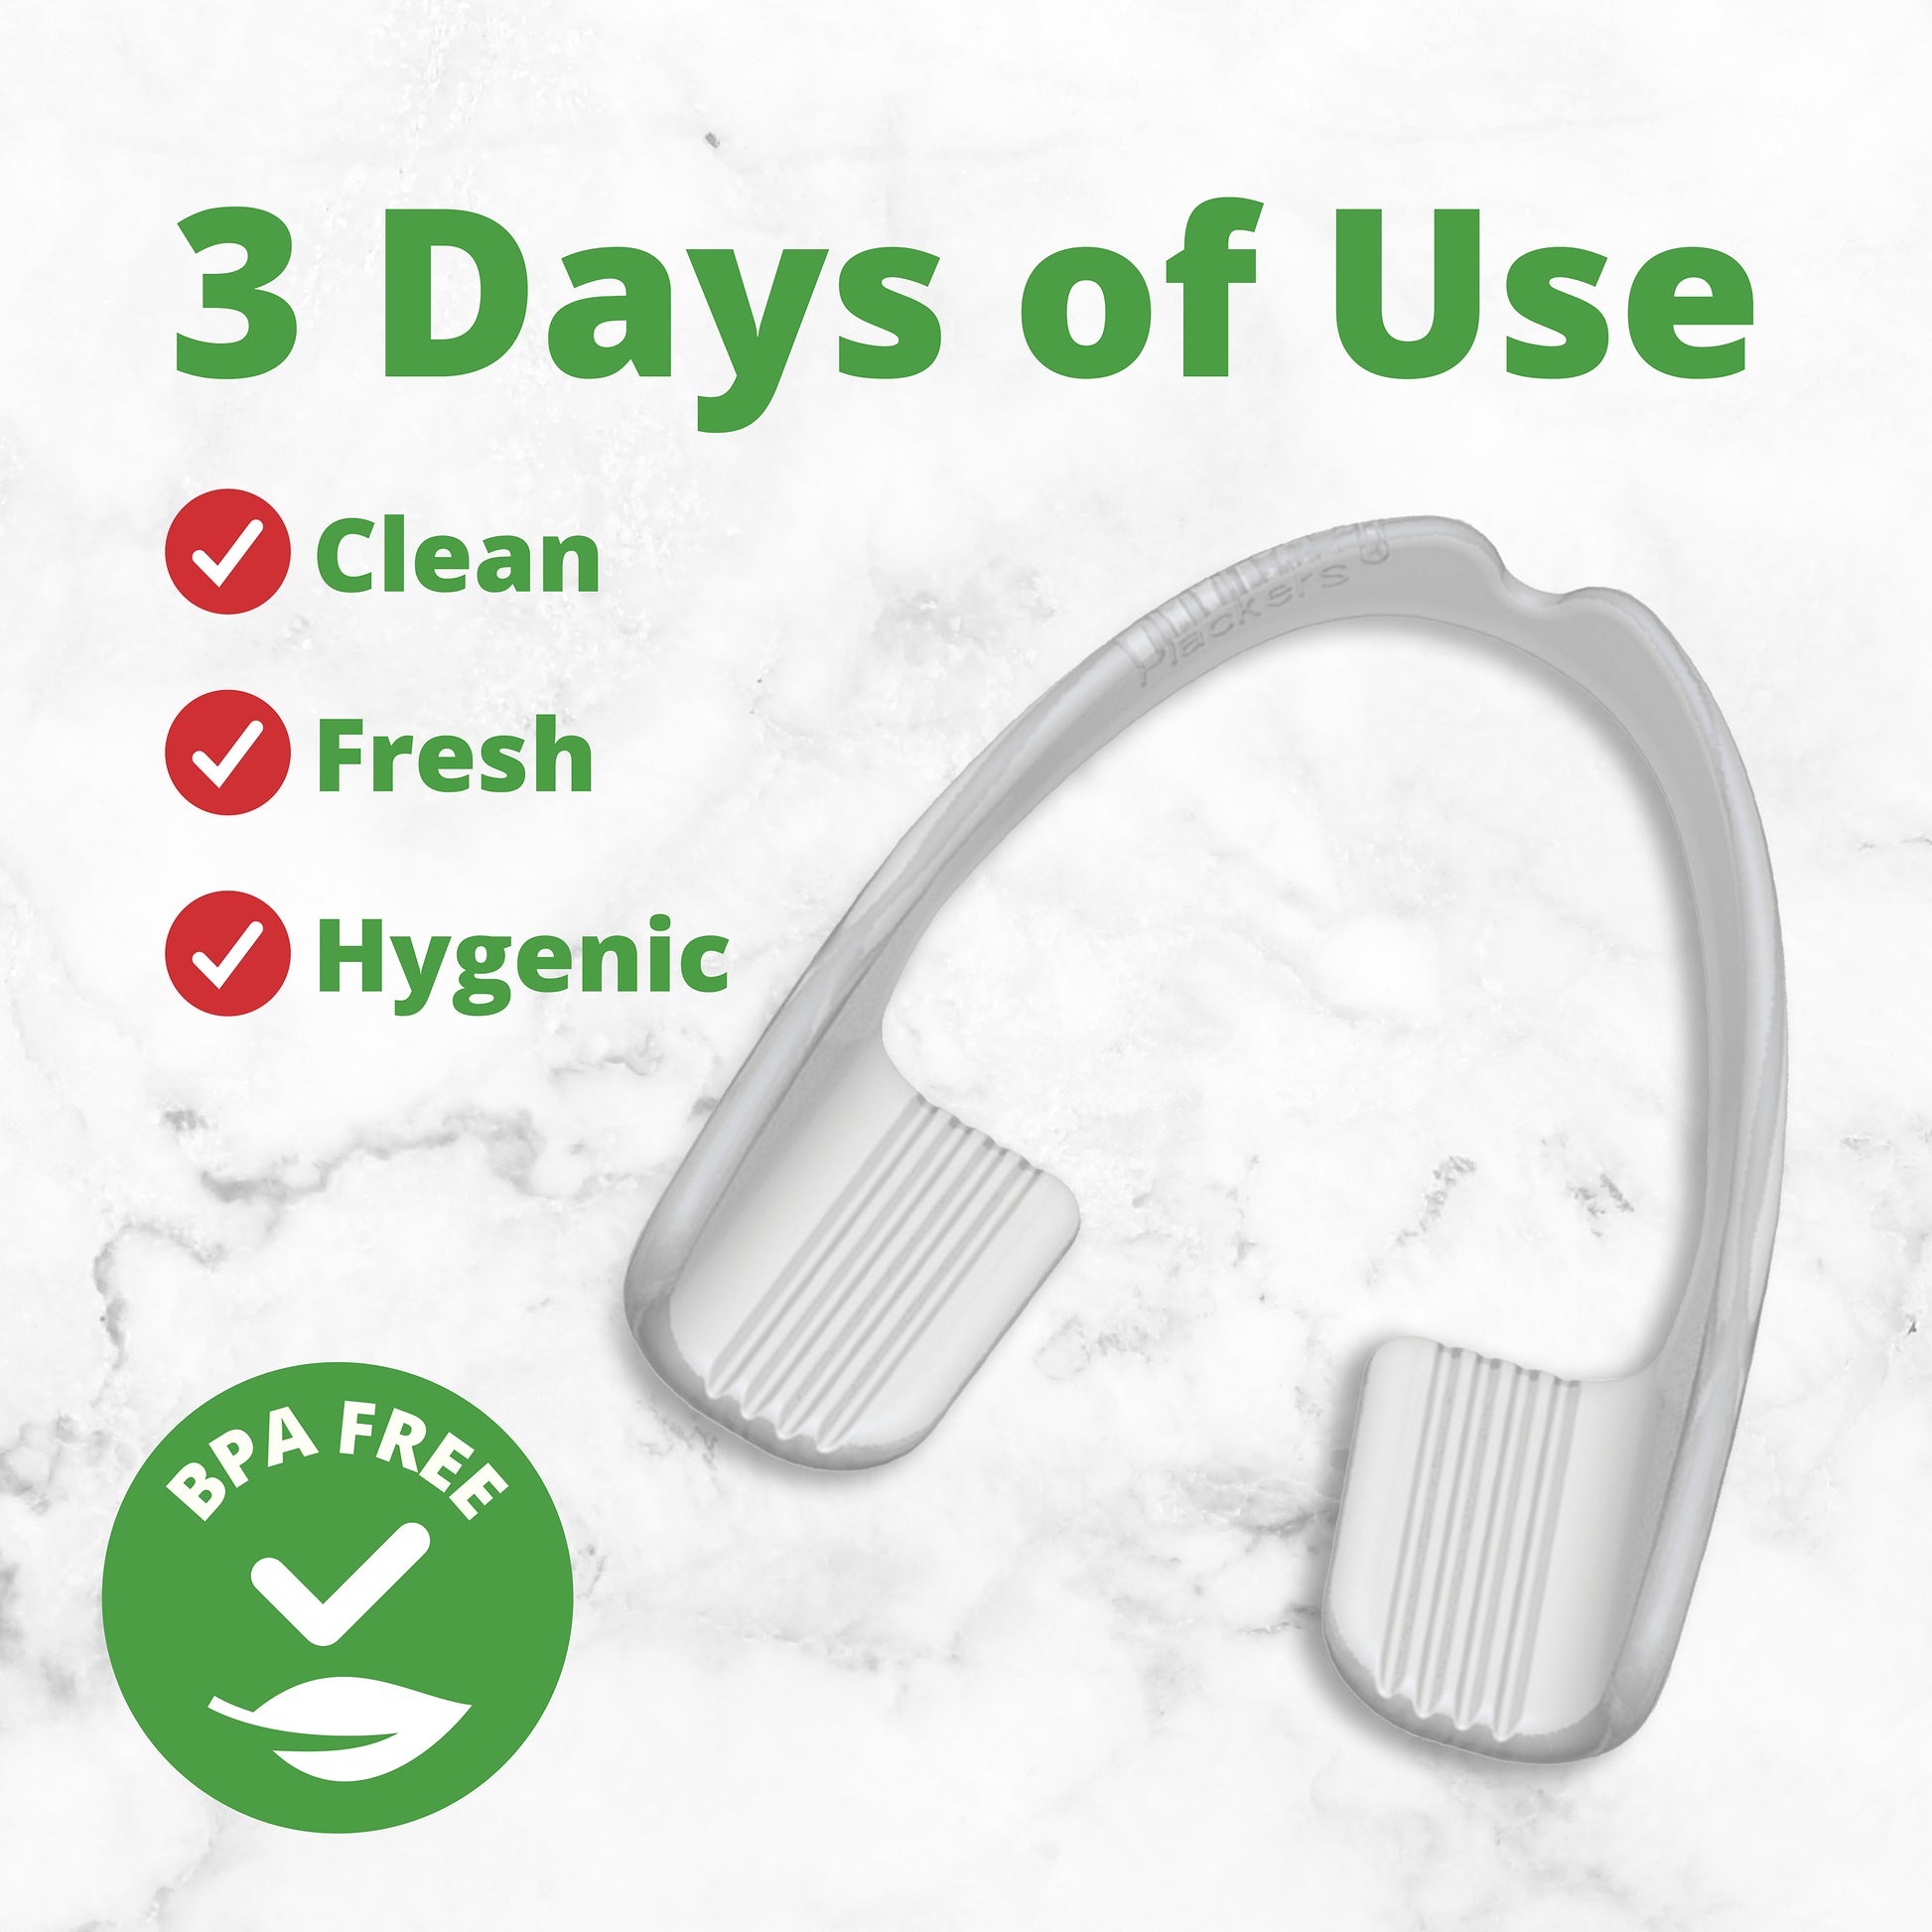 3 Days of Use. 3 red icons with checkmarks in them. 1. Clean 2. Fresh 3. Hygenic. Green icon with checkmark with copy BPA Free